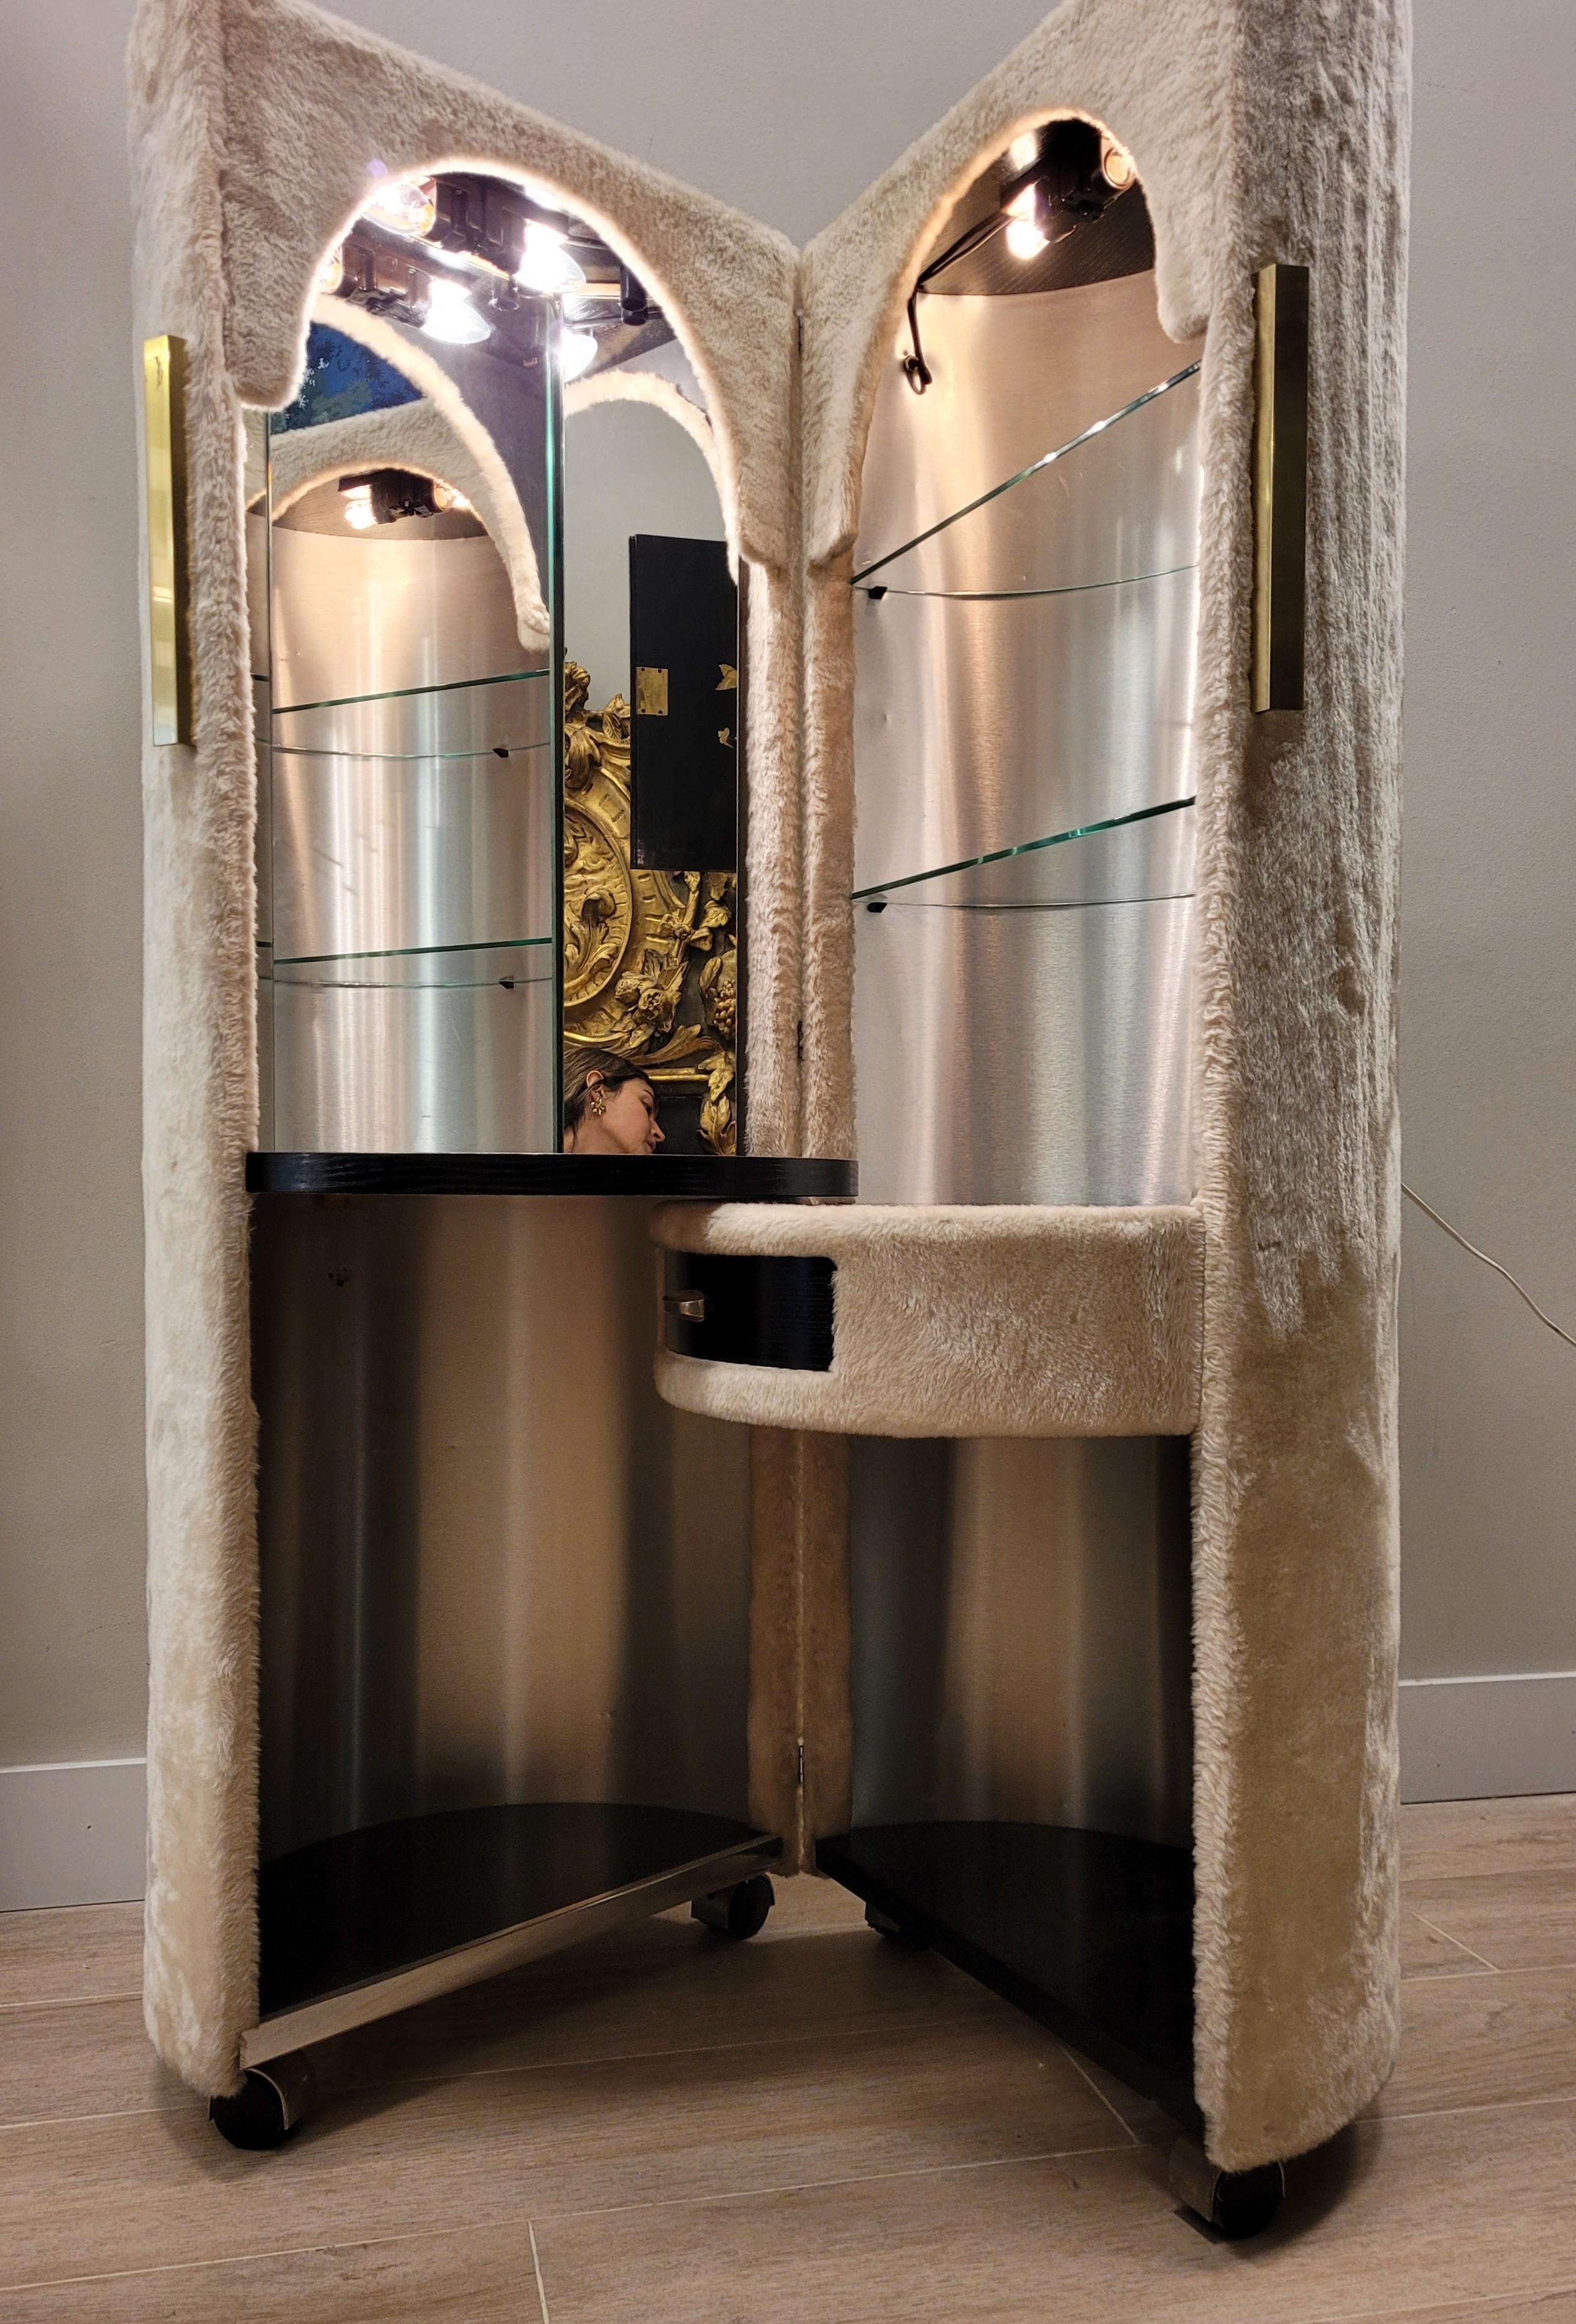 Gorgous , sophisticated and charming folding dressing table by Luigi Massoni for Poltrona Frau. It is a sophisticated piece with a cylindrical shape, upholstered with light beige velor / plush. Each half cylinder has interior lighting. It has